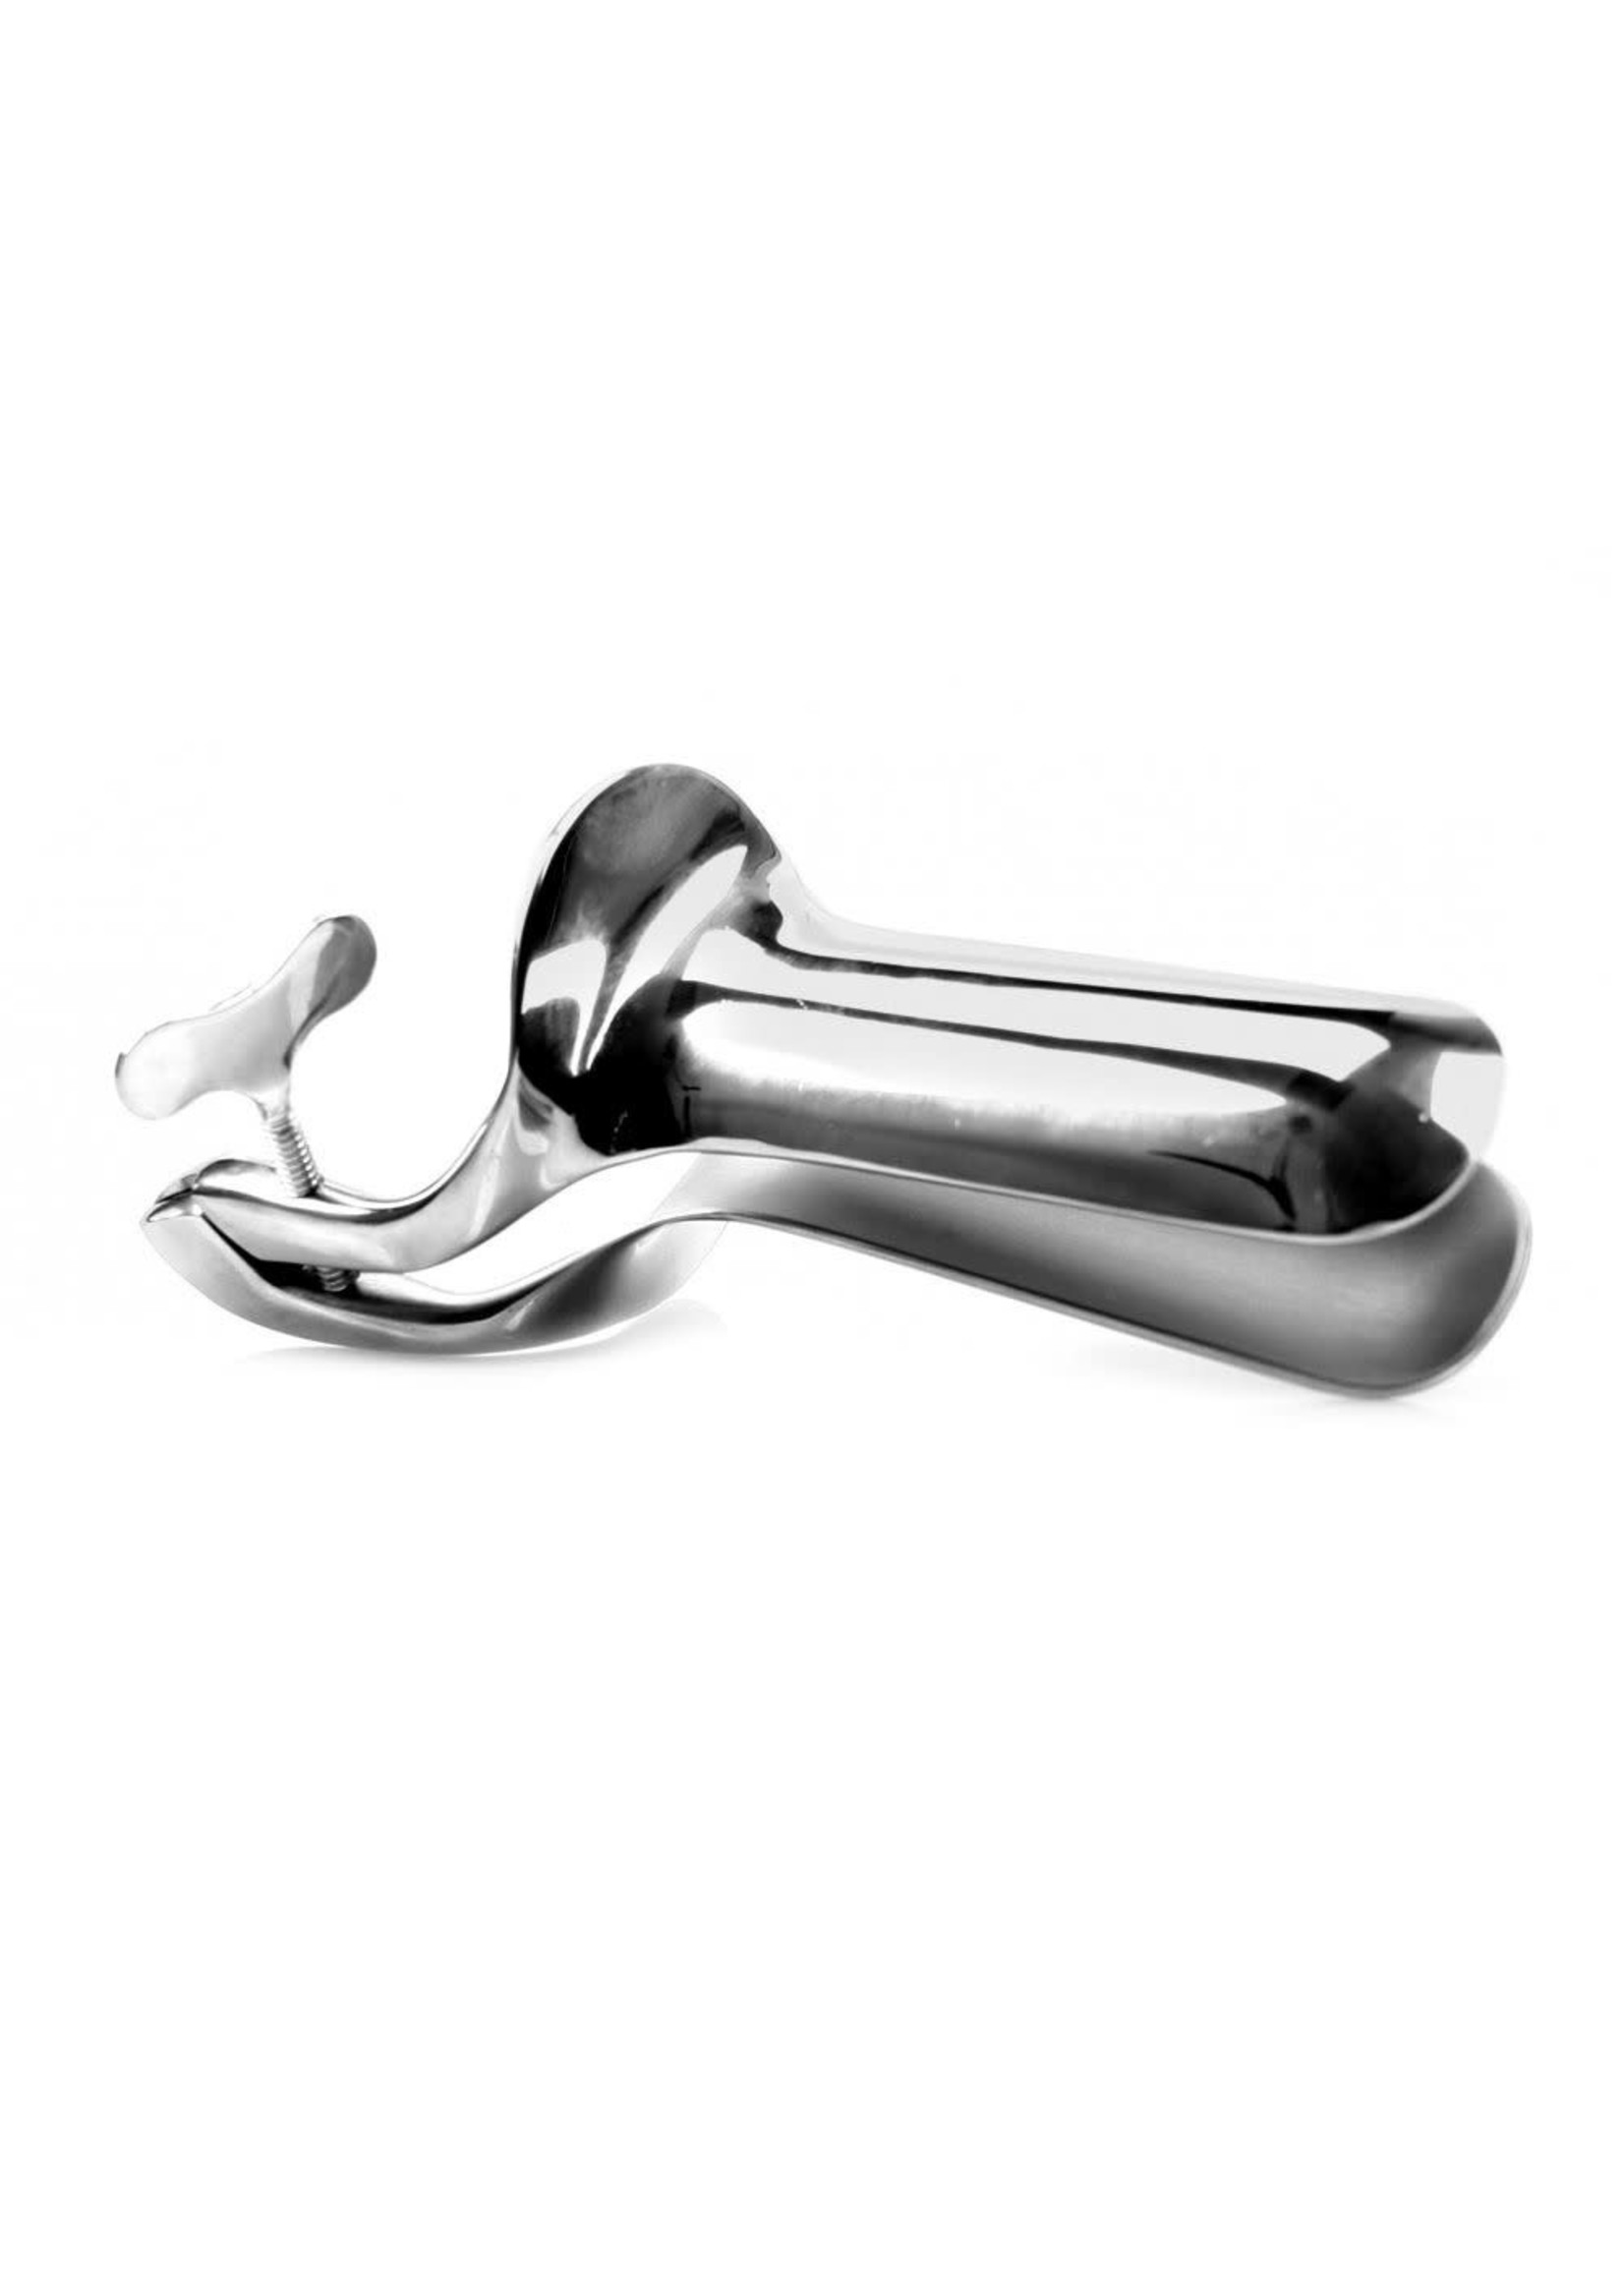 O-Products Collins speculum